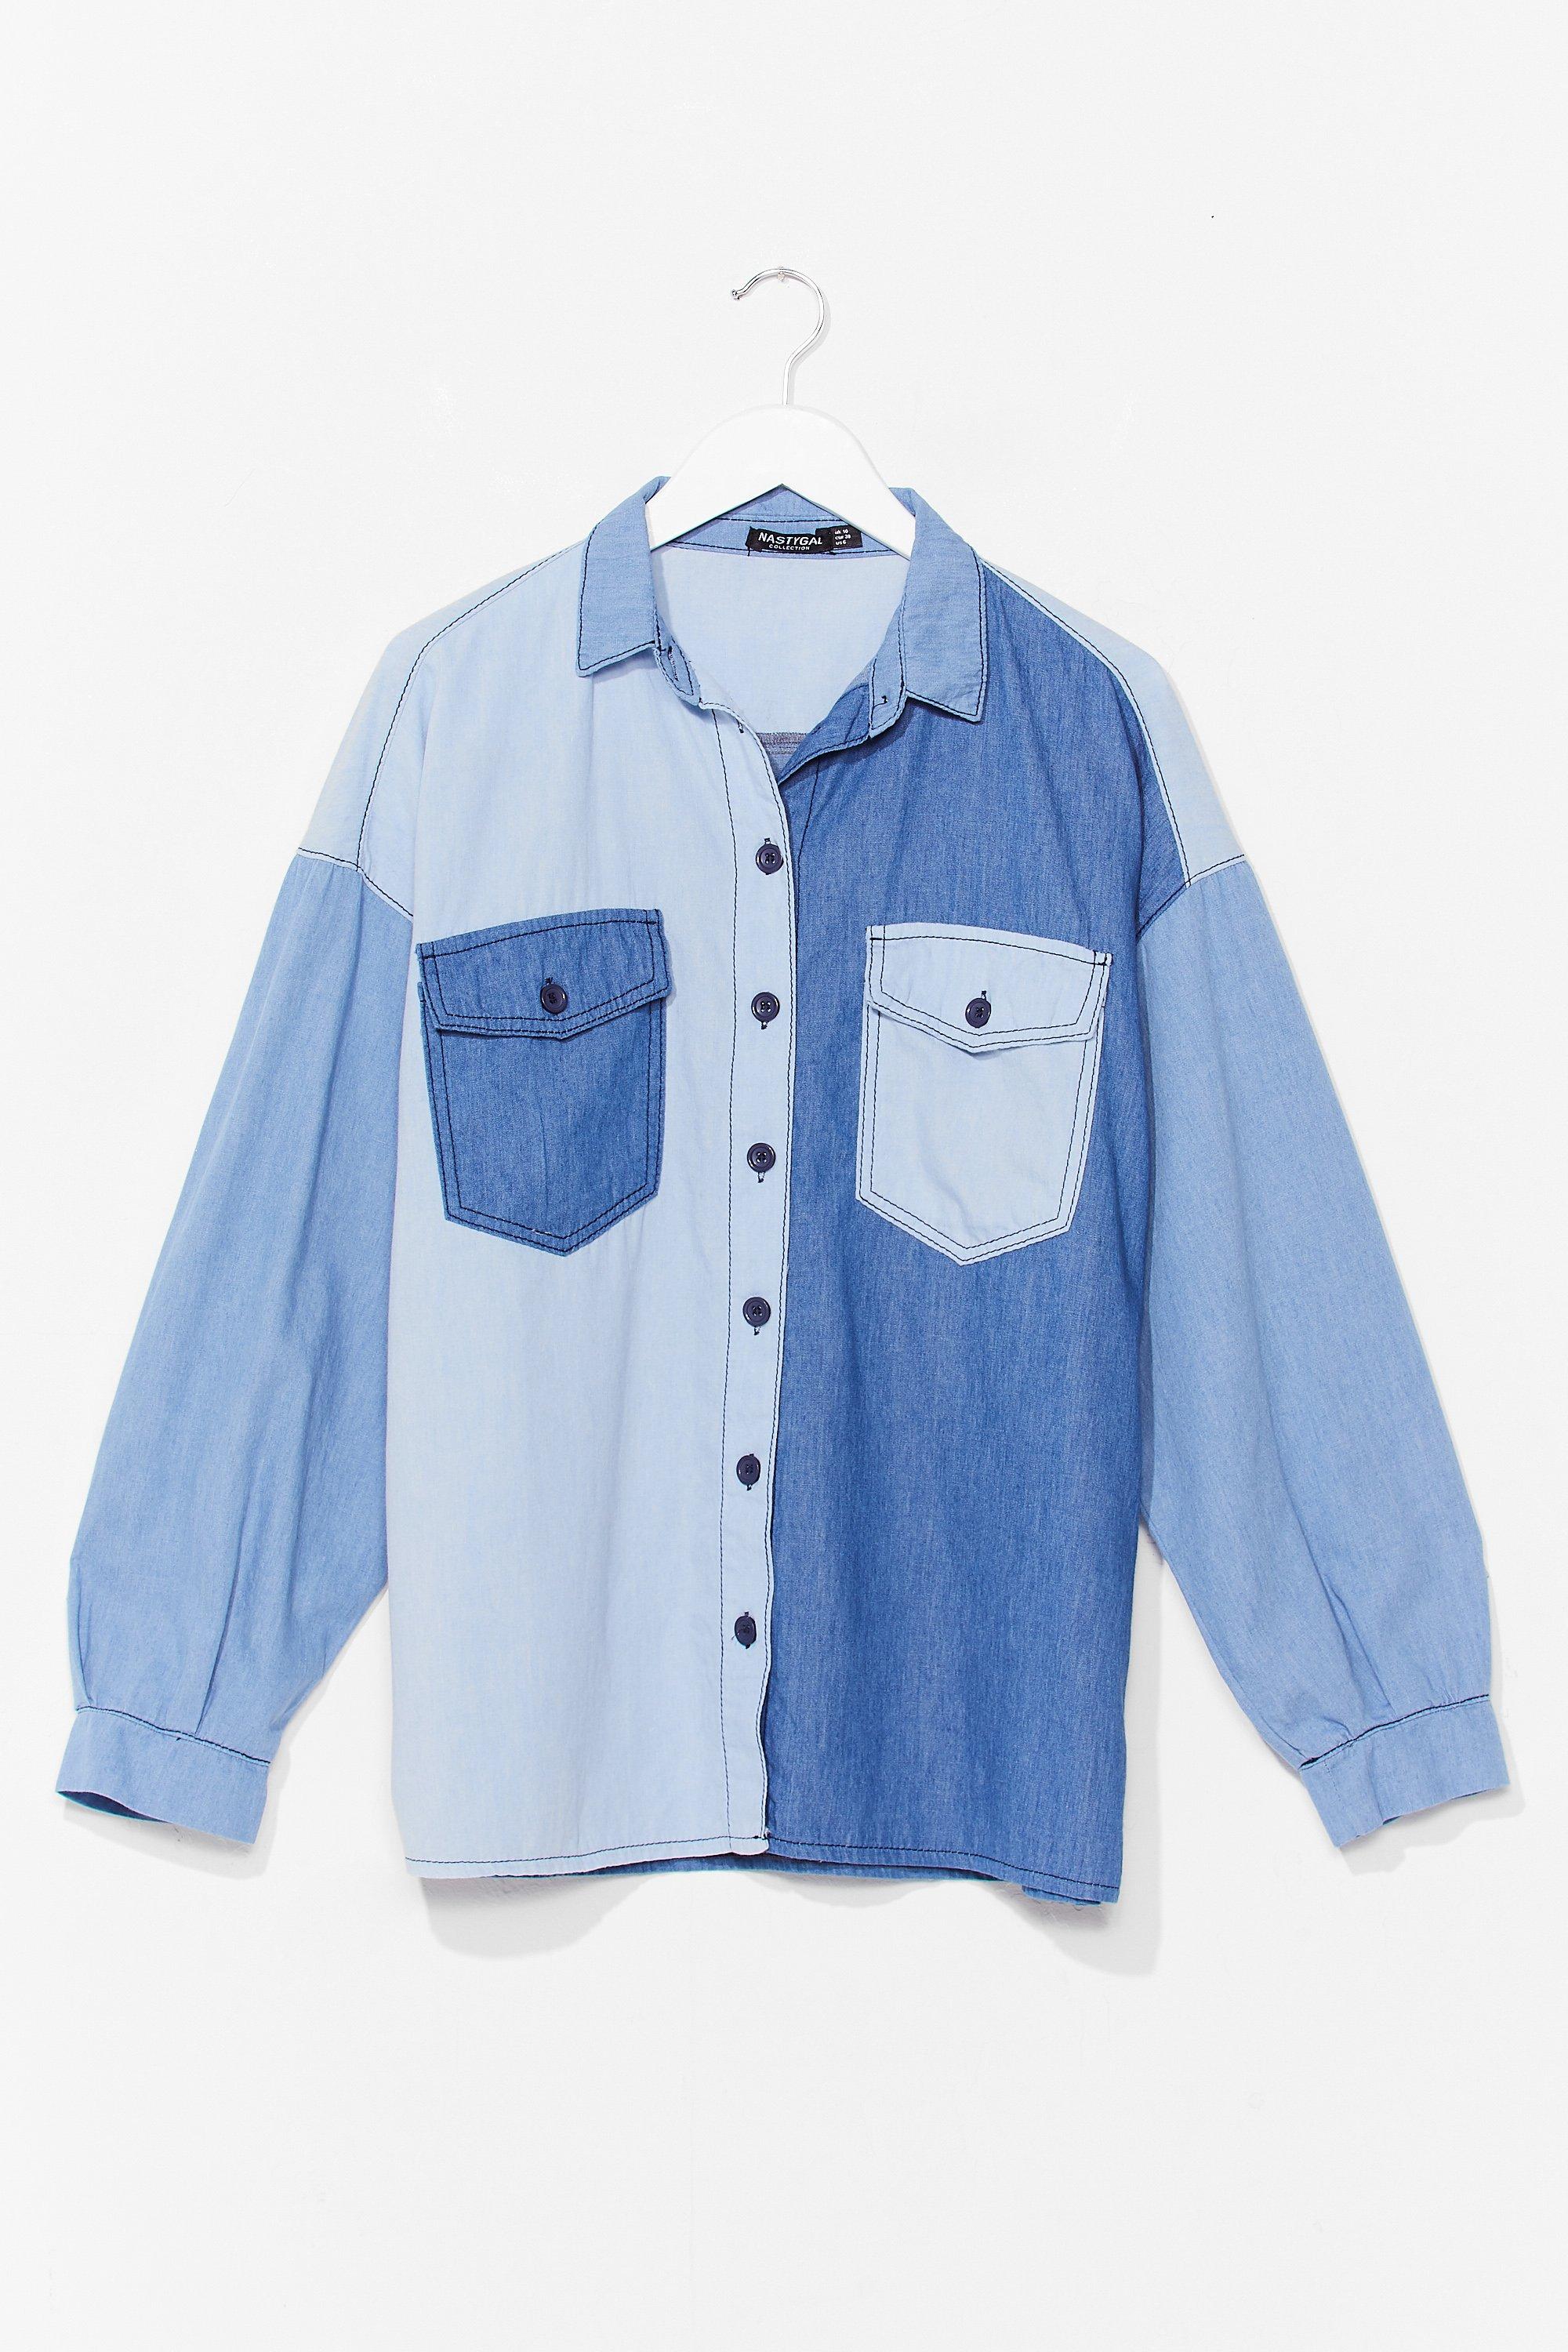 Mixed Messages Two-Tone Denim Shirt 